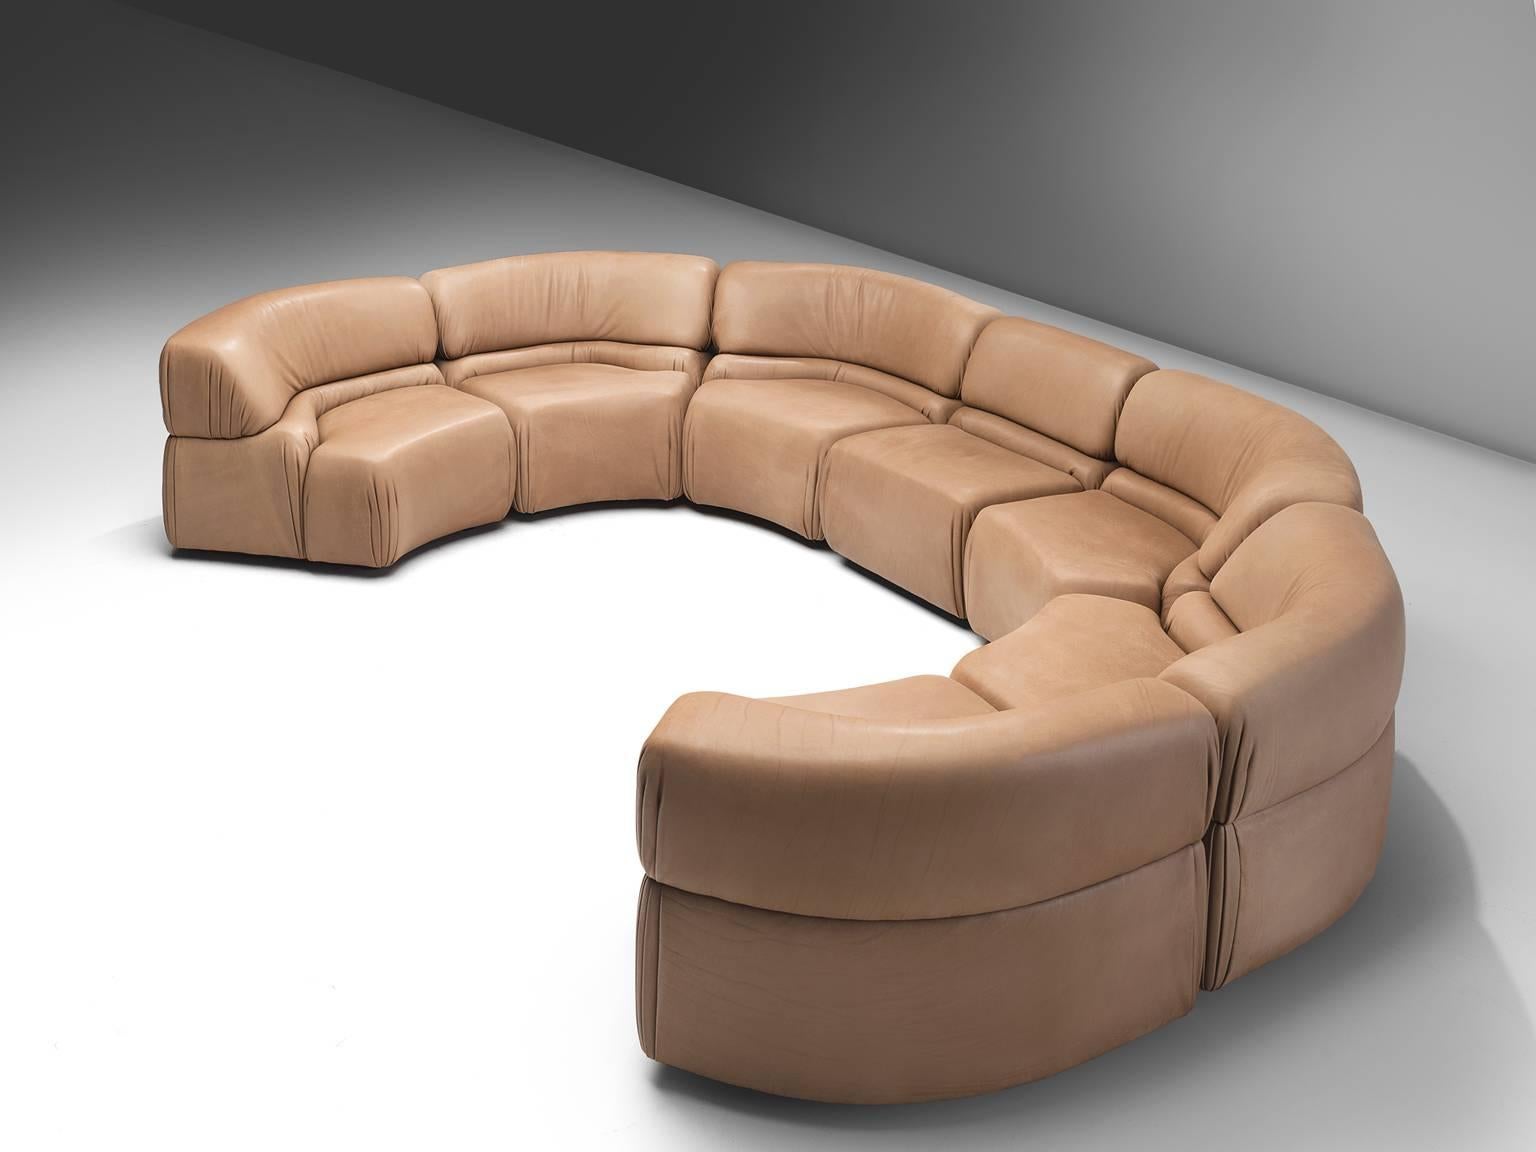 De Sede 'Cosmos', beige brown leather, seven elements, Switzerland, 1970s.

Thick, high-quality modular sofa made by De Sede in Switzerland in the 1970s. Due to the separate elements, the couch can be used in a variety of different positions. The